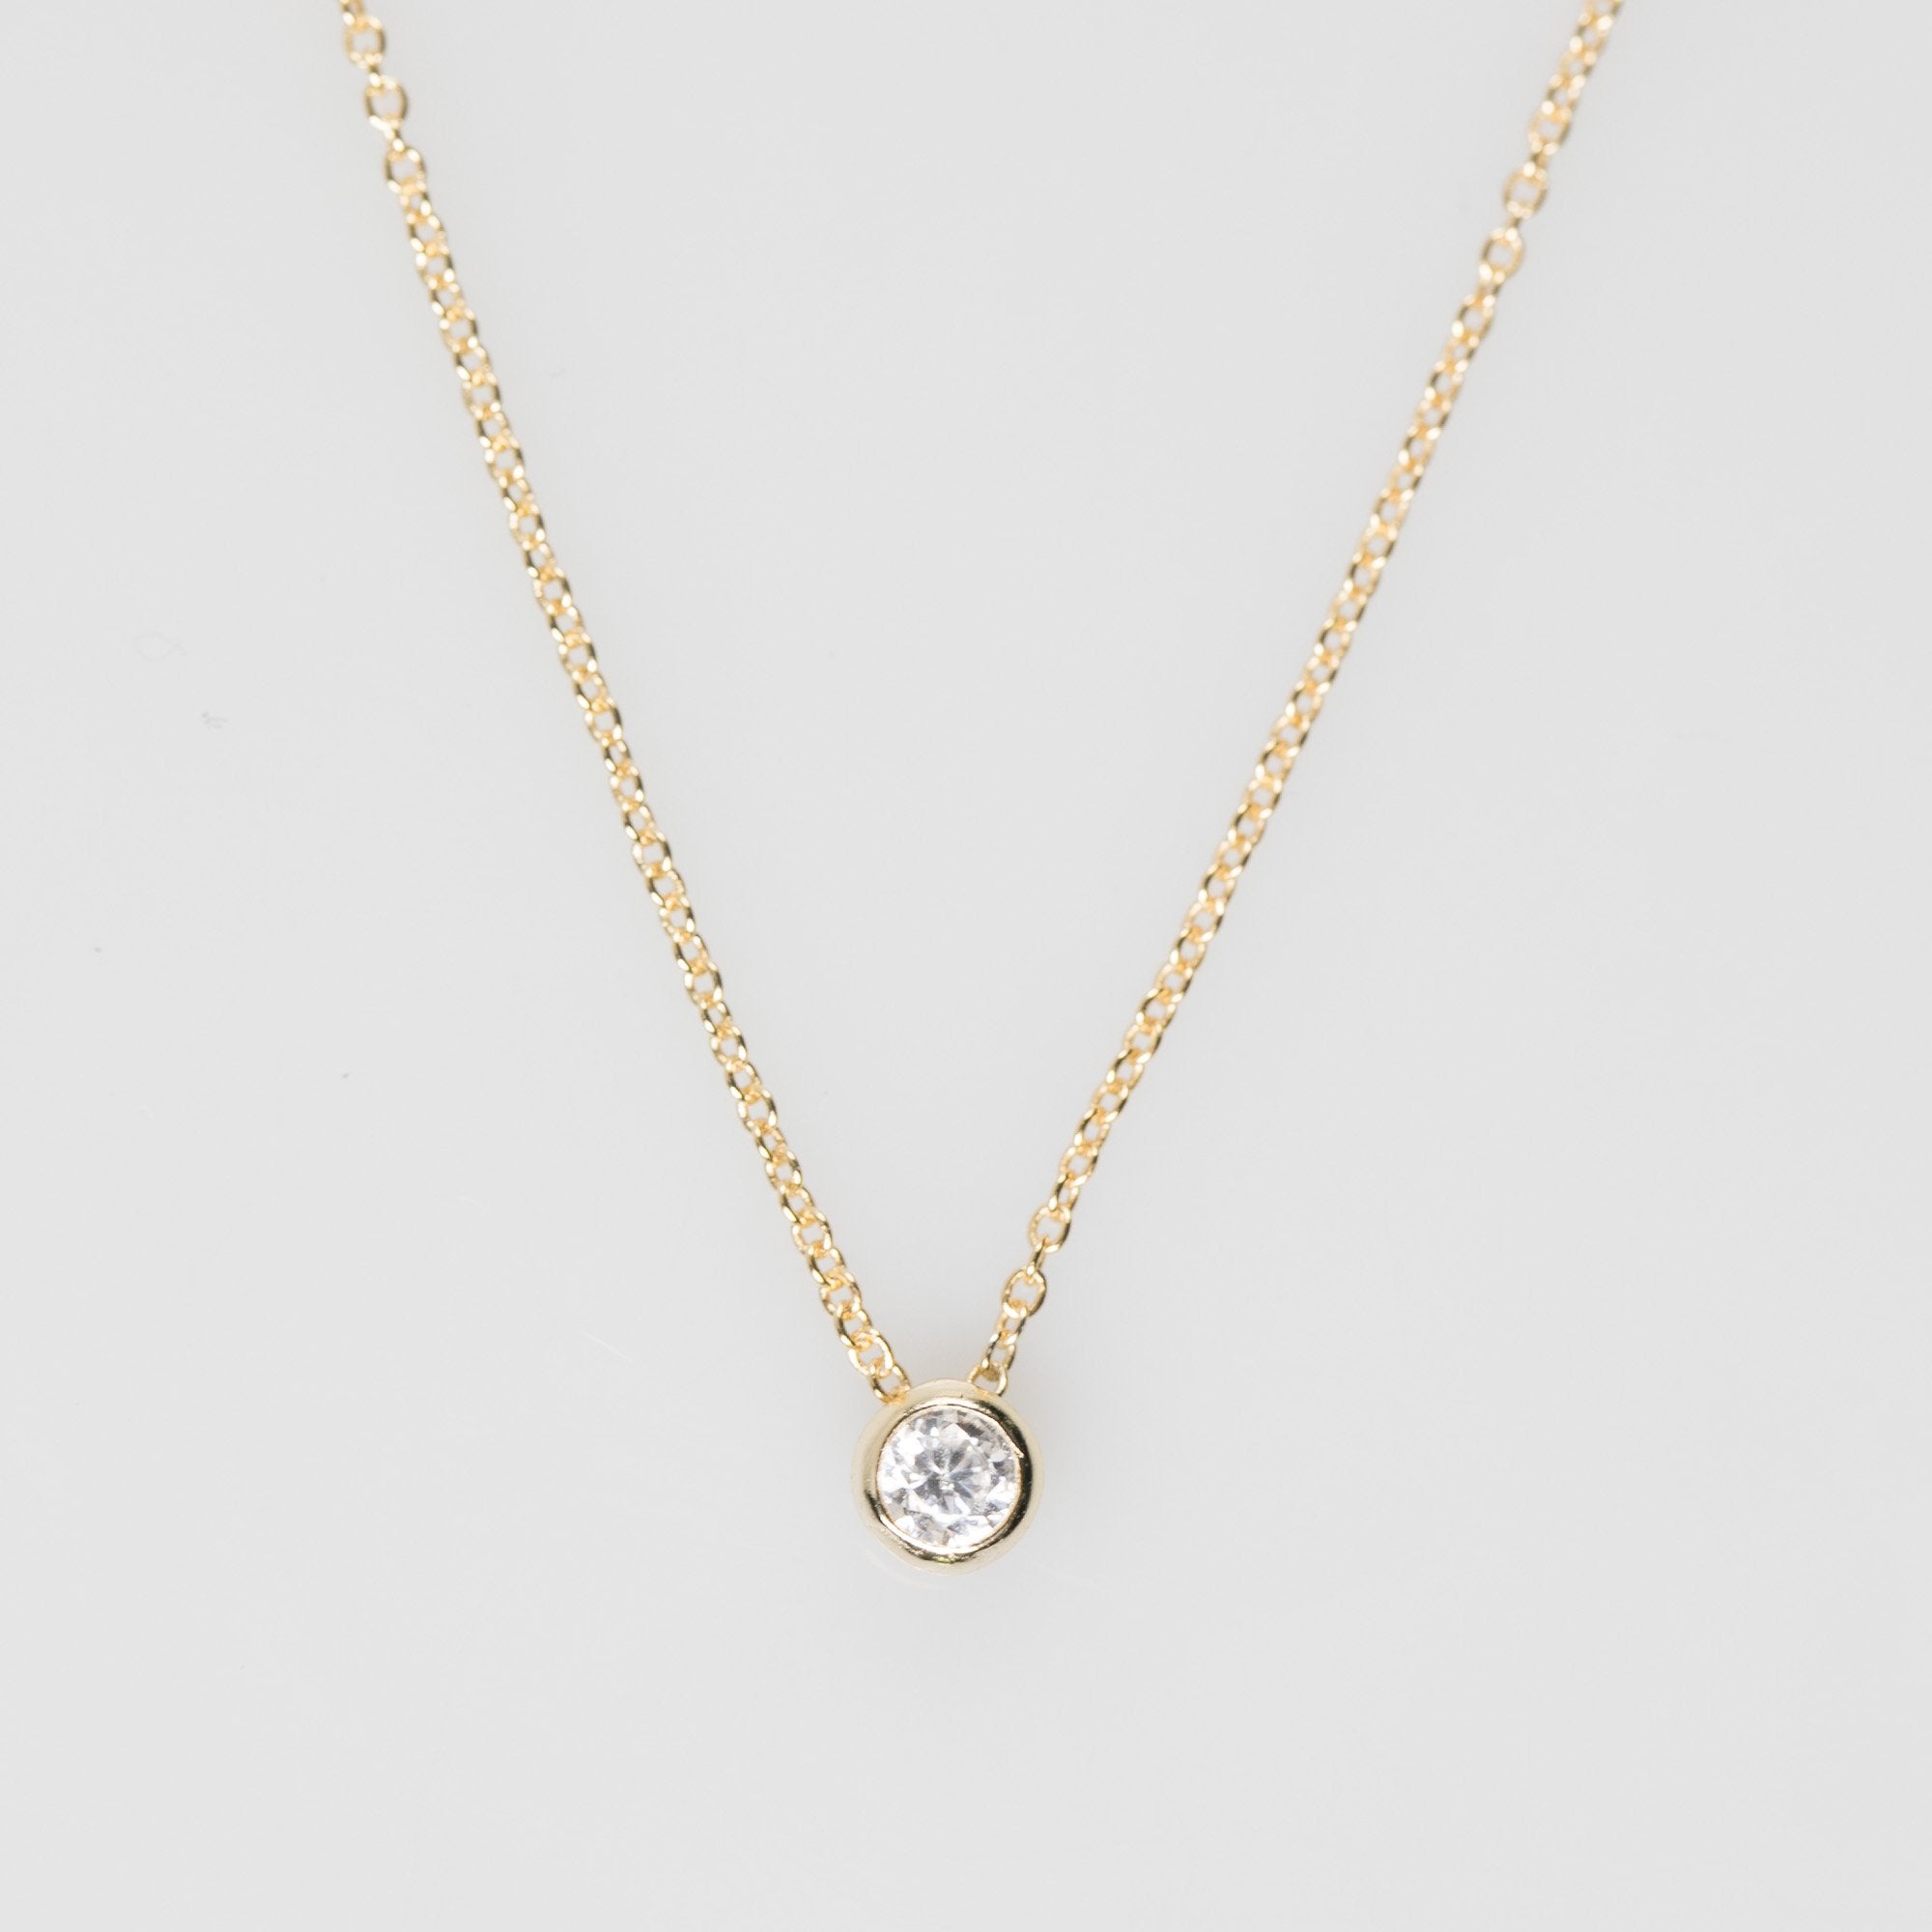 Gold plated necklace with cubic zirconia pendant